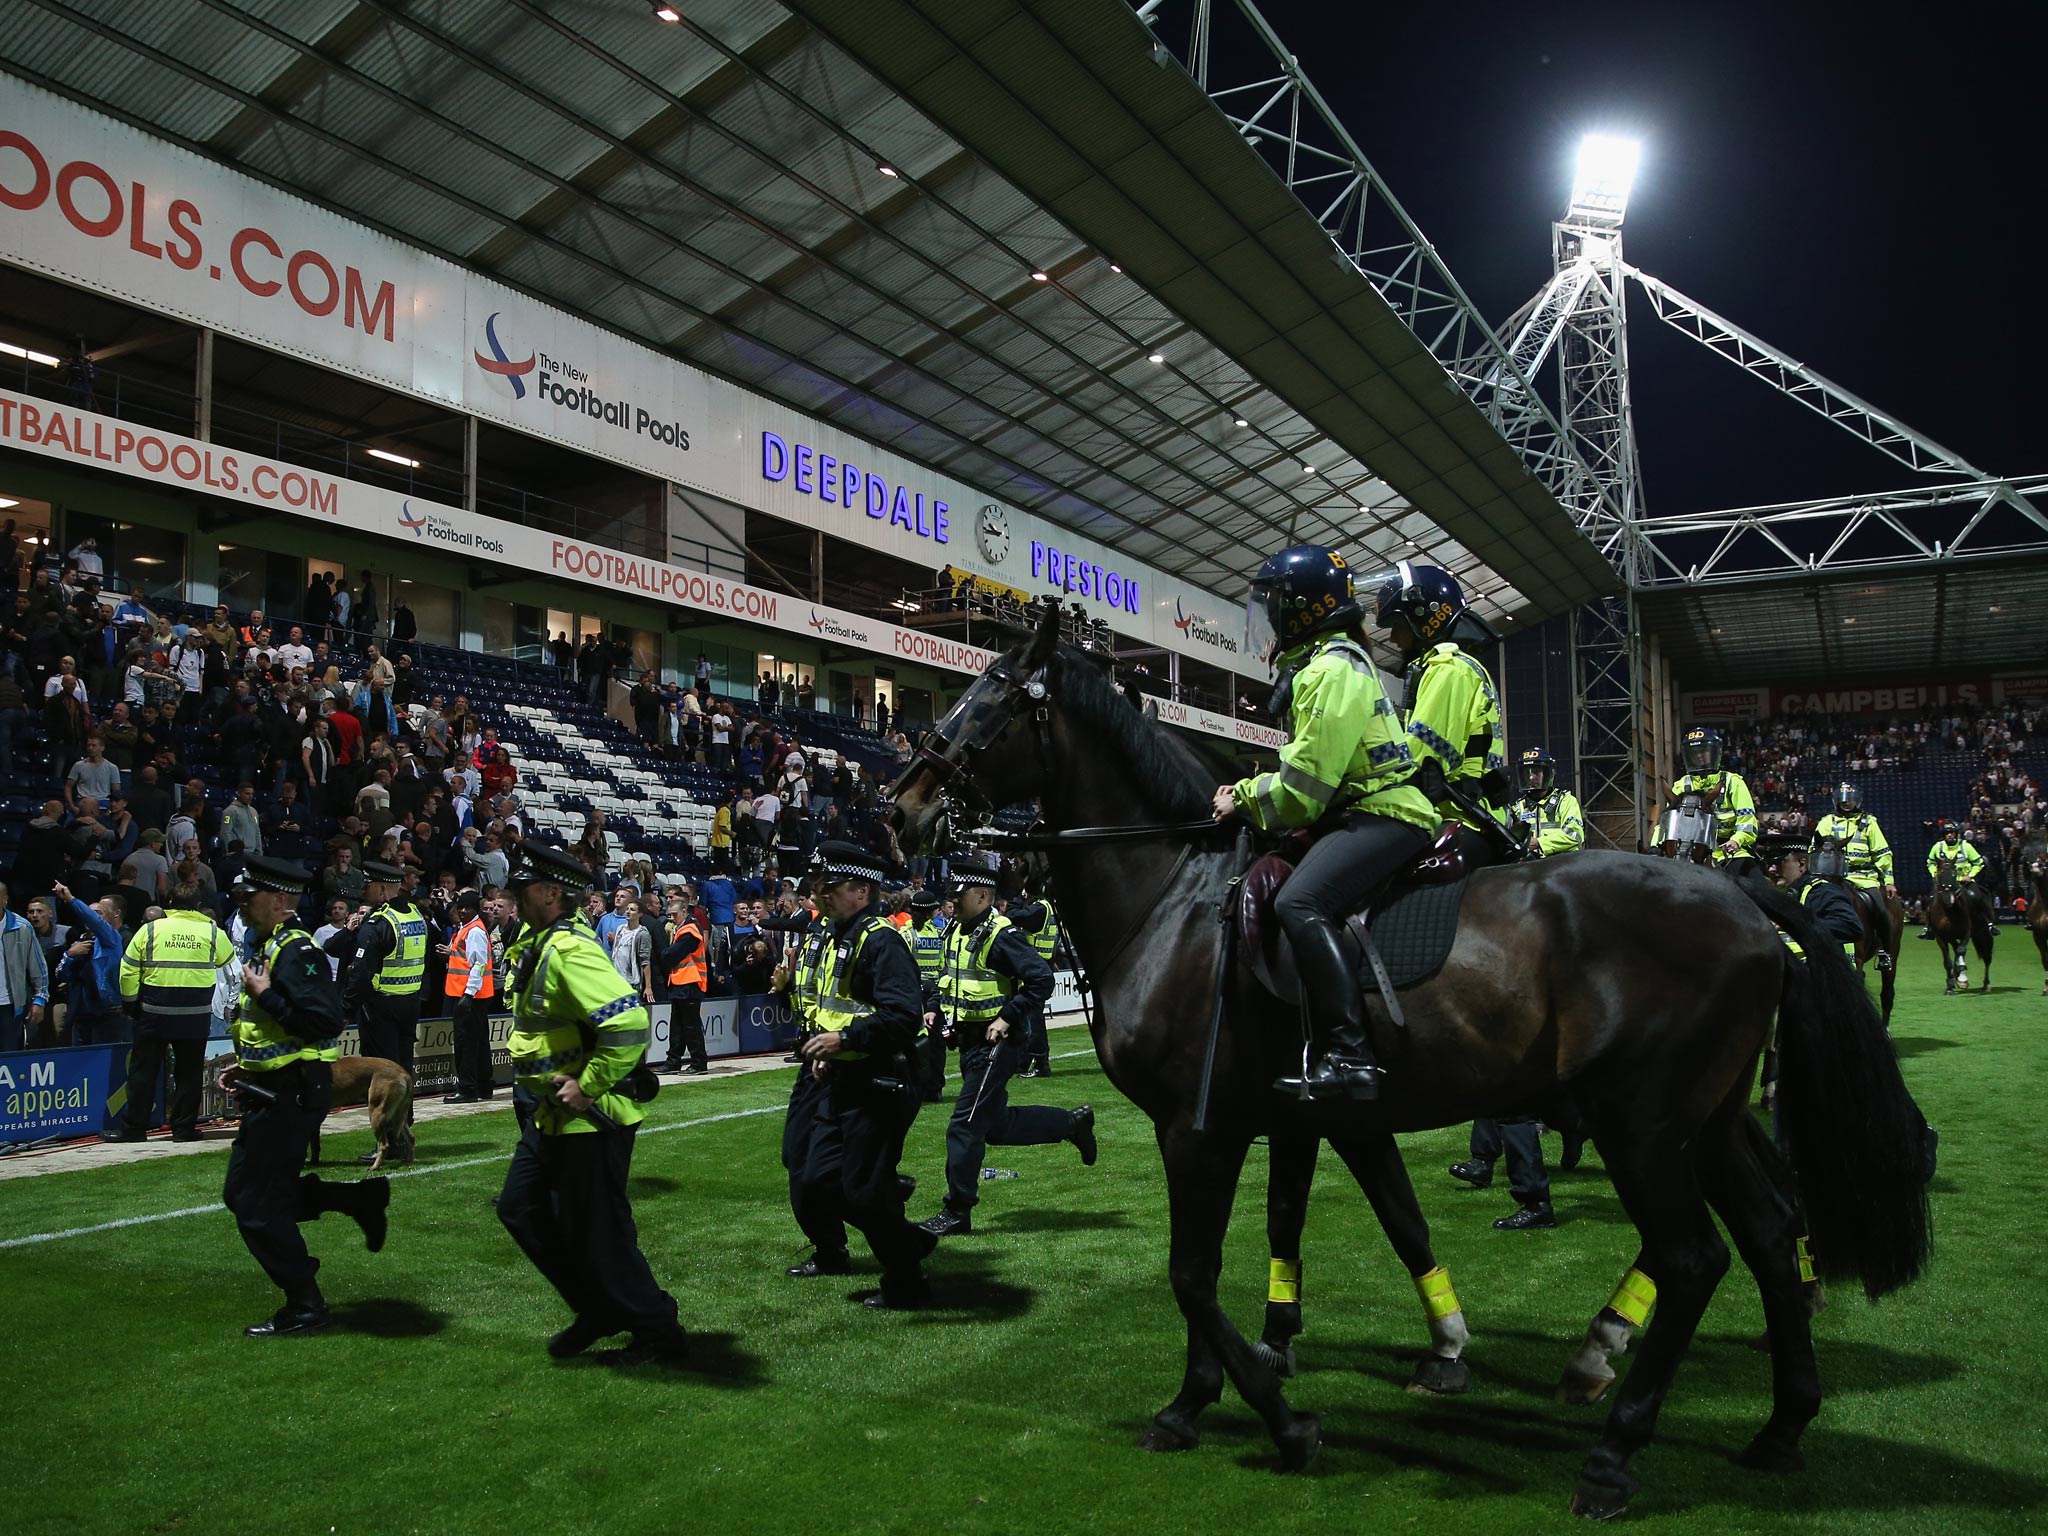 Police on foot and horse try to control the pitch invasion by fans at the final whistle of the Capital One Cup first round match between Preston North End and Blackpool